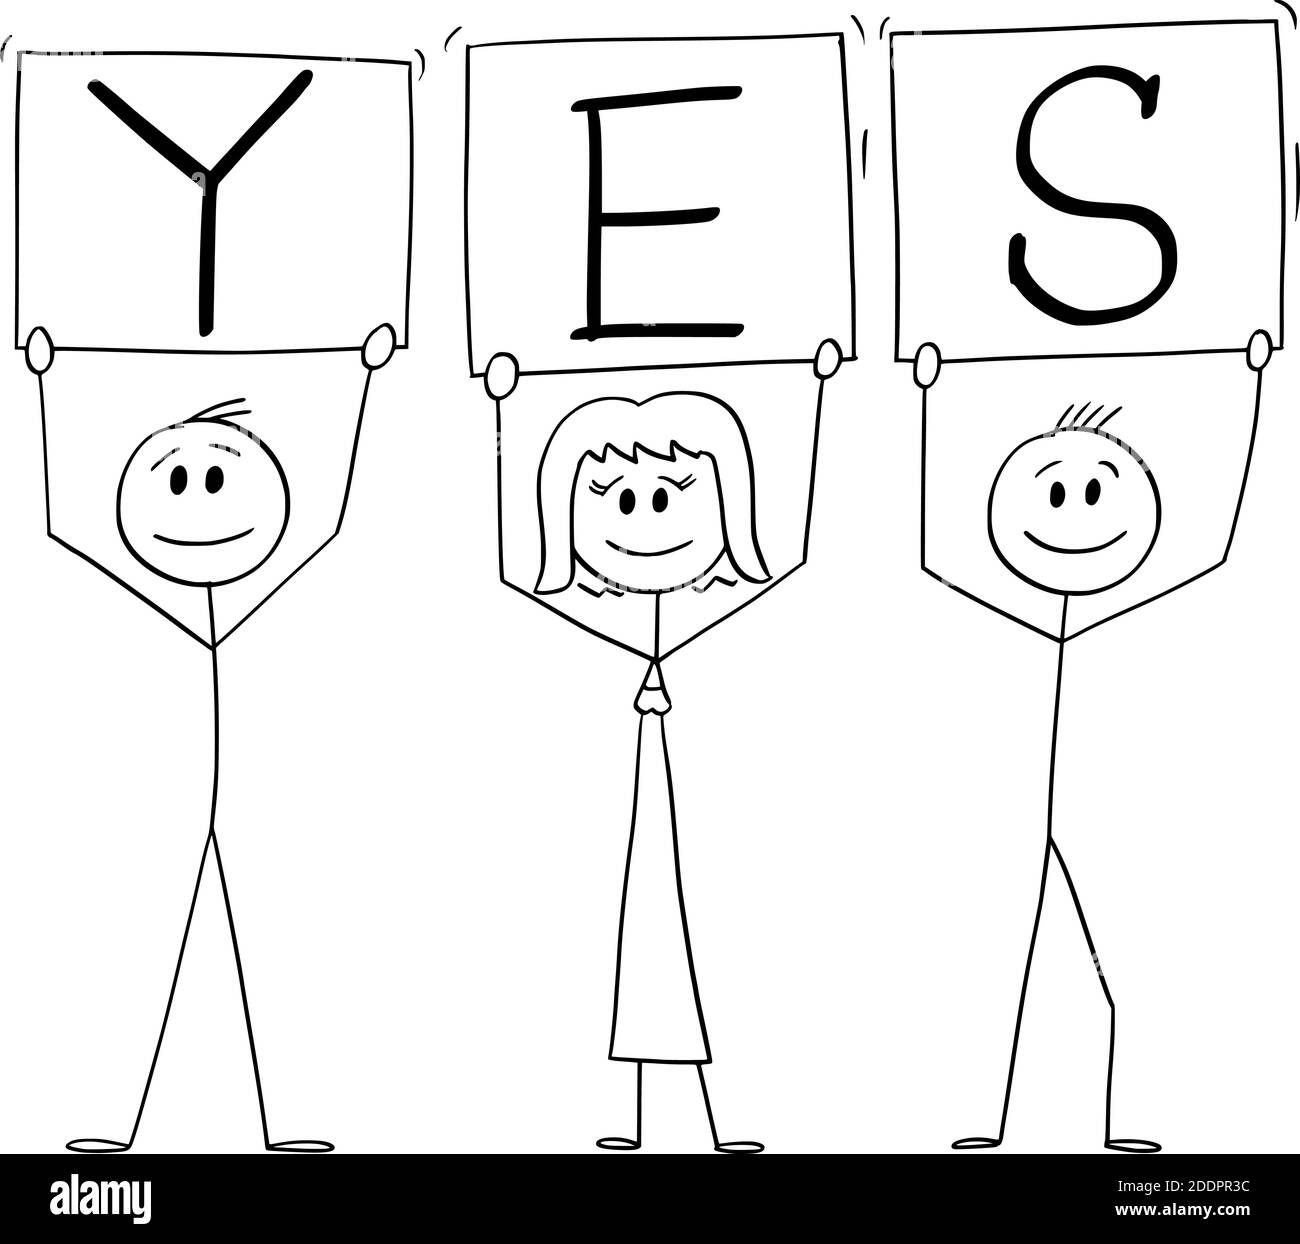 Vector cartoon stick figure illustration of three smiling positive people on demonstration holding yes signs. Stock Vector